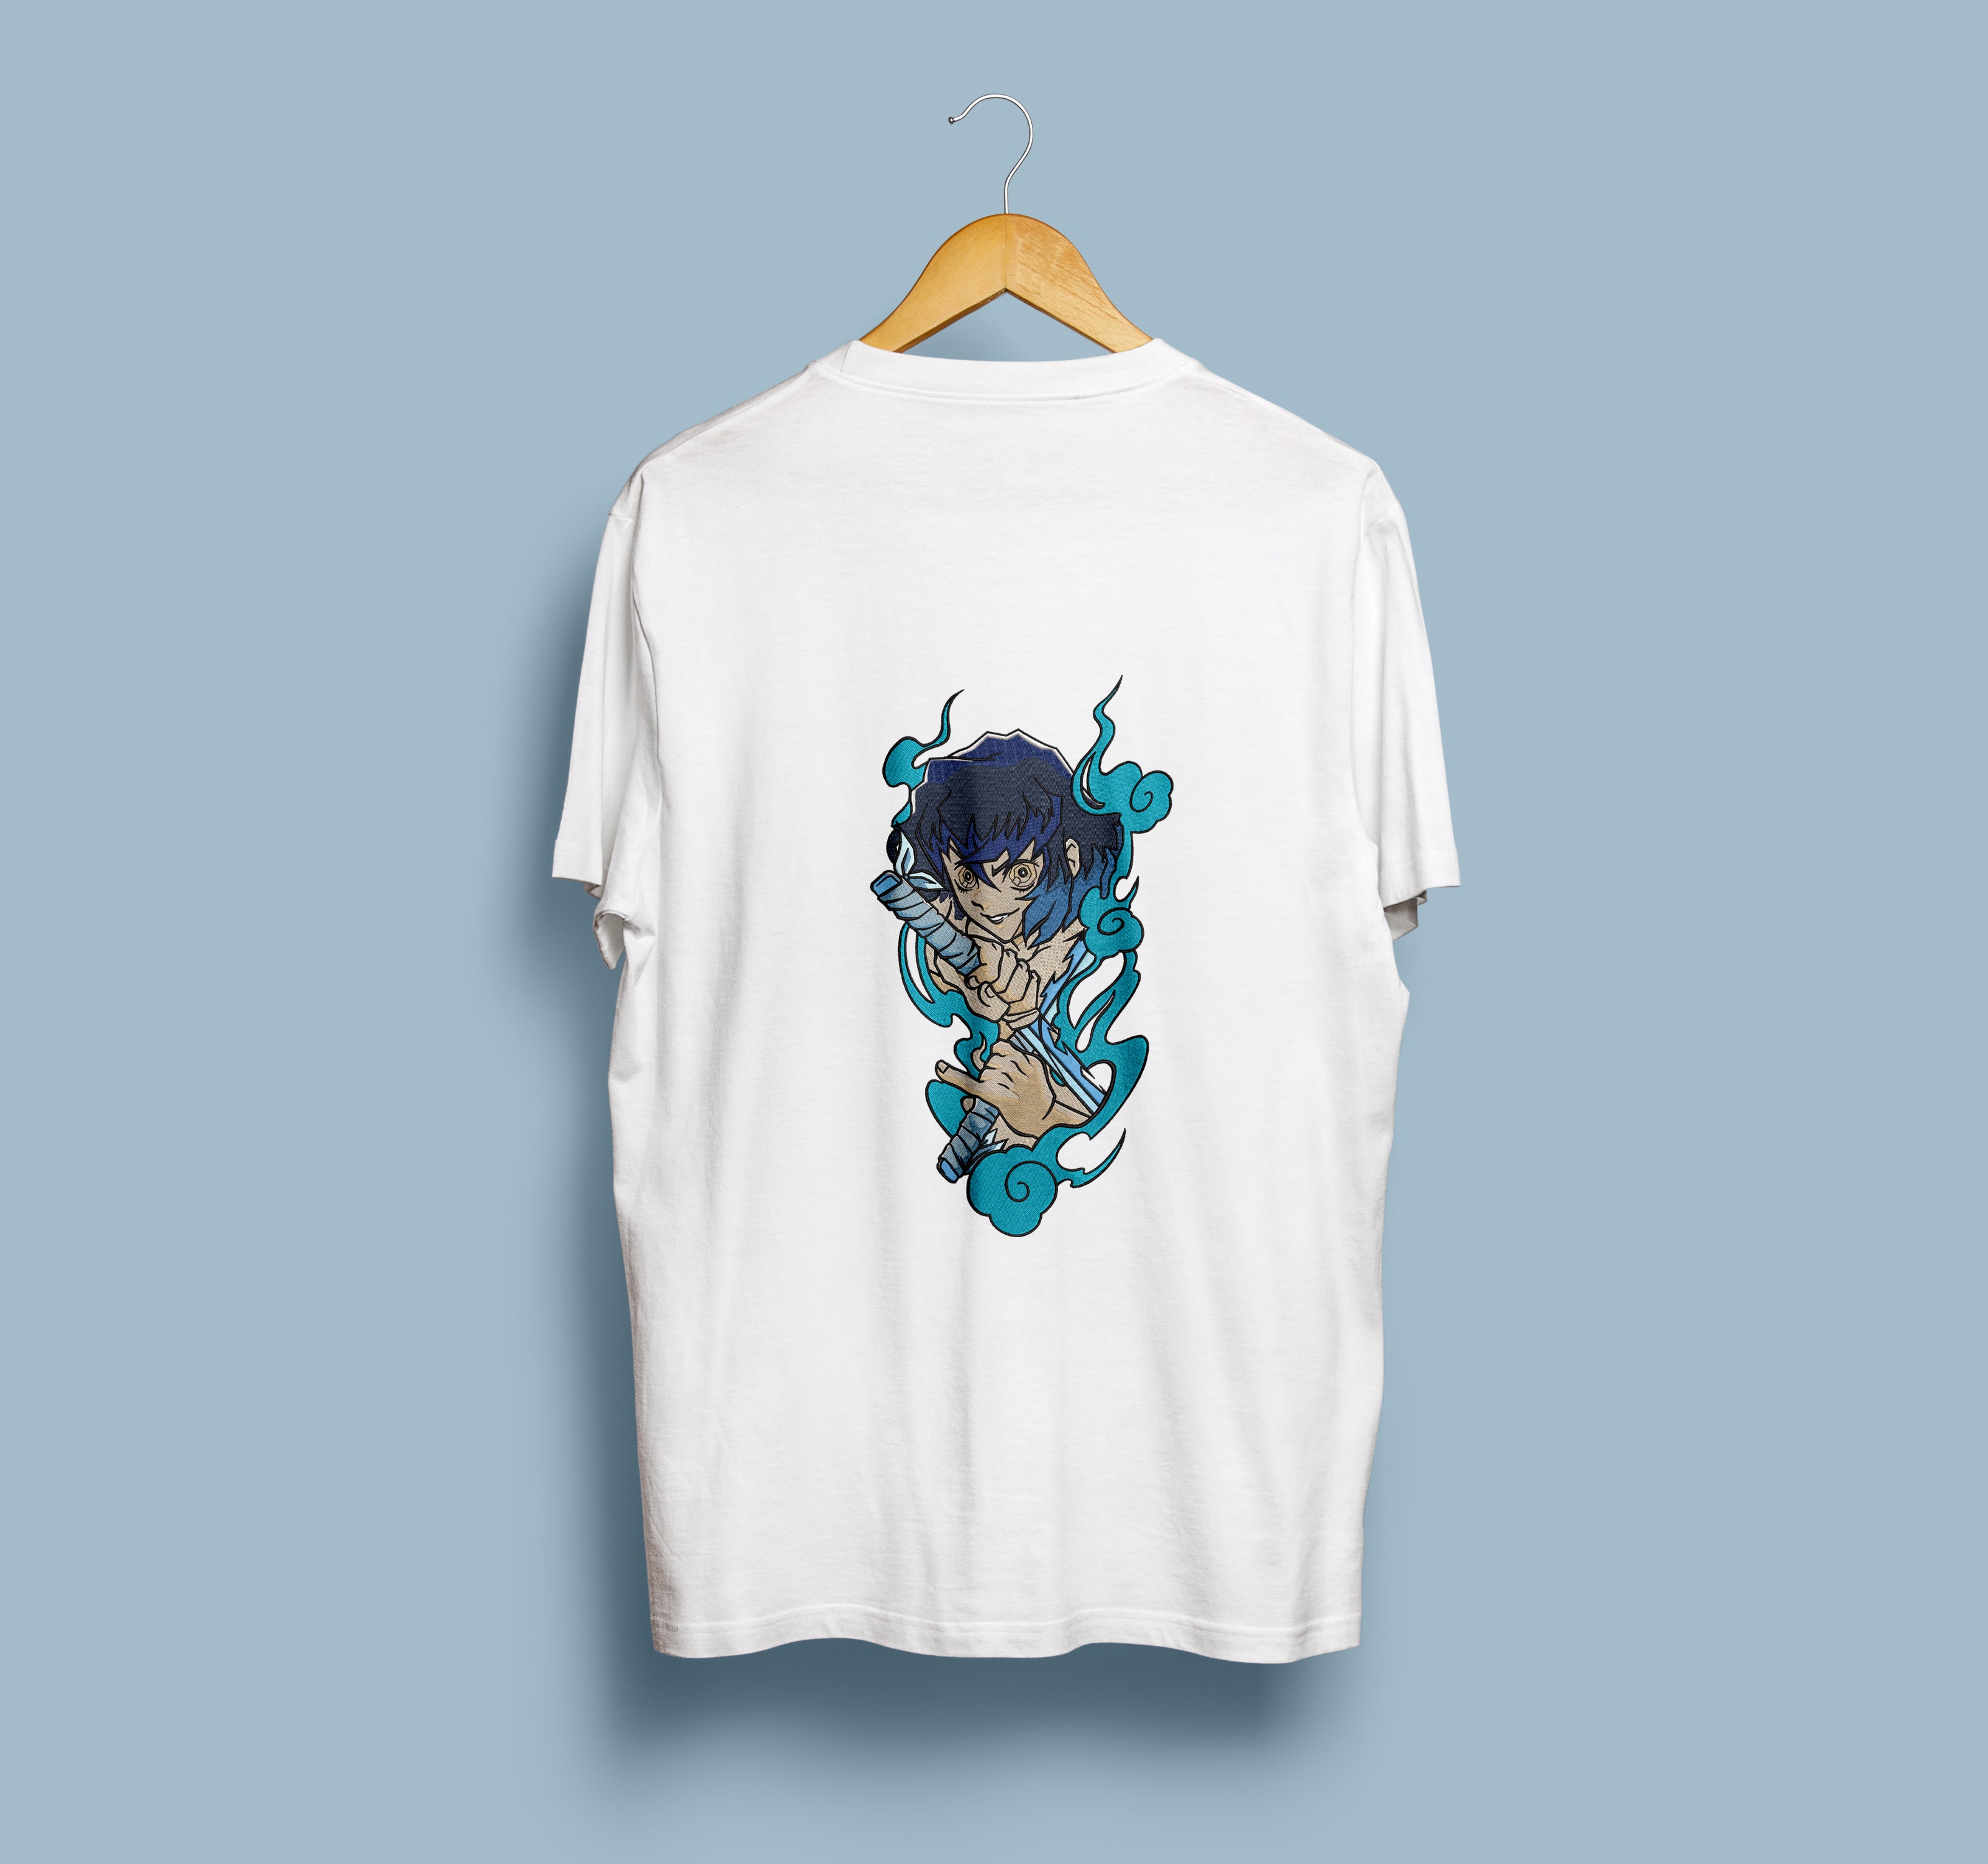 Iconic Characters T-Shirt |Anime Graphic T-Shirt India |Anime T-shirts  India |Available in 2 Styles| Shop Now